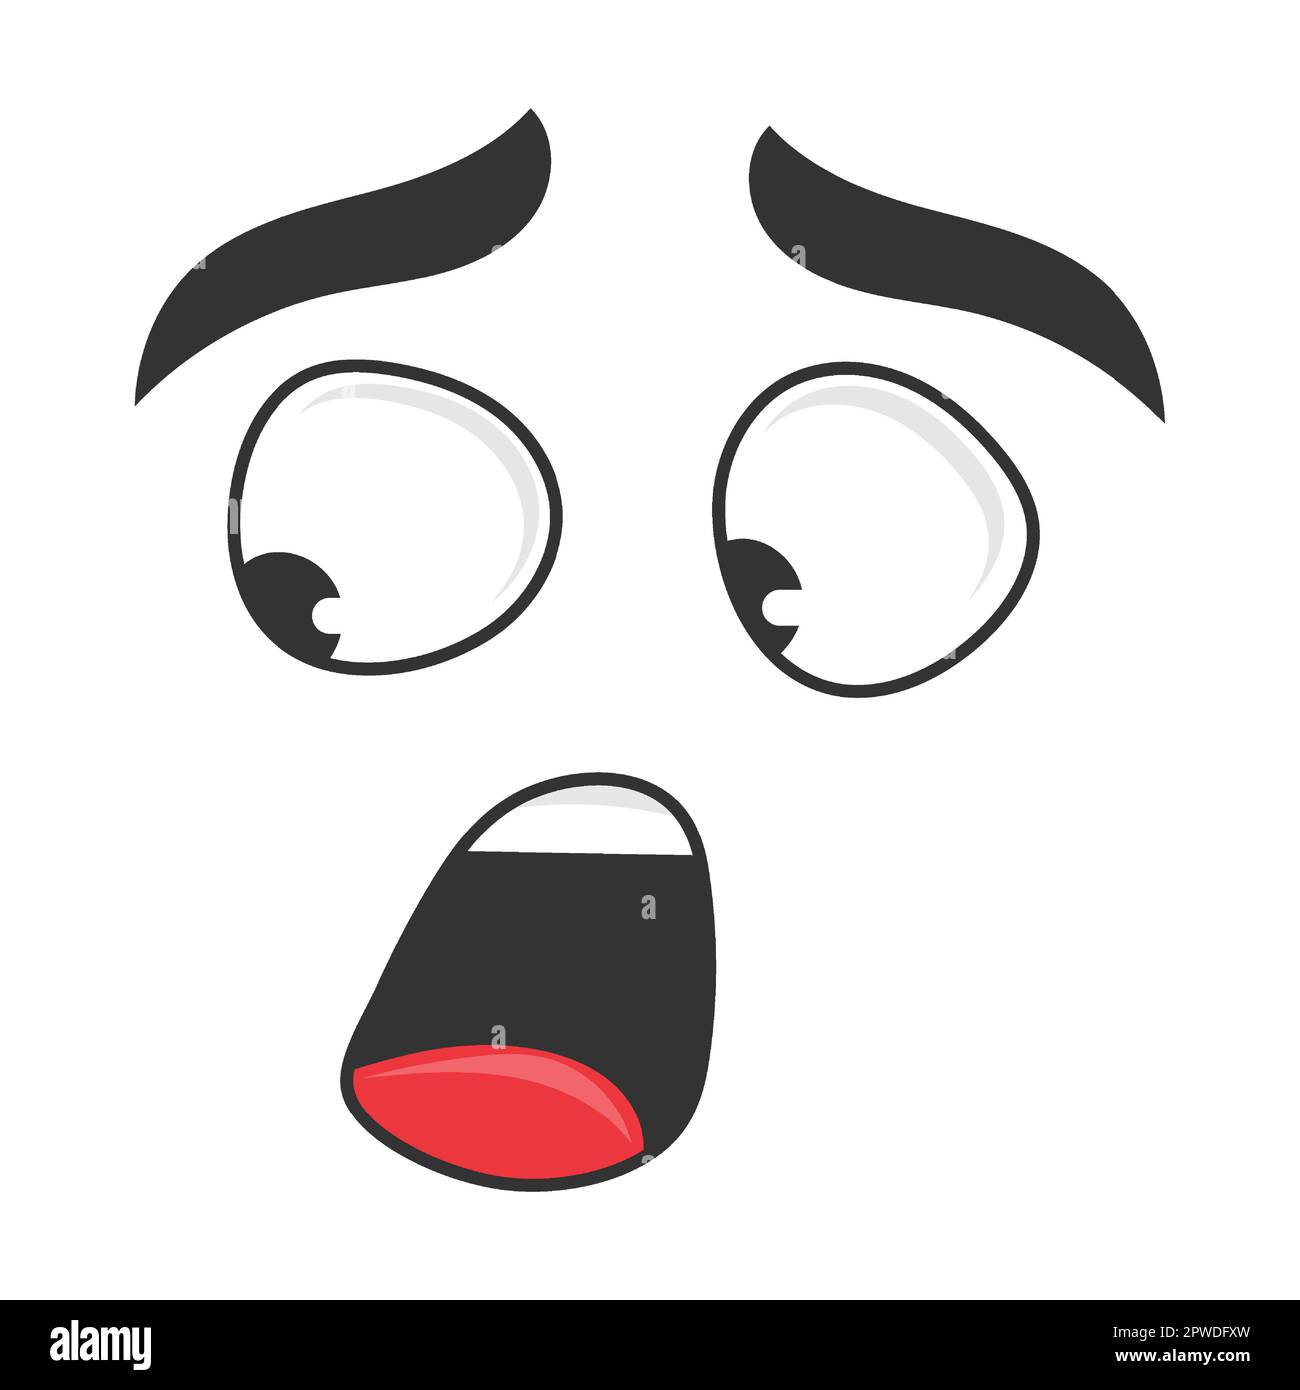 Expression of fright and fear cartoon face vector illustration